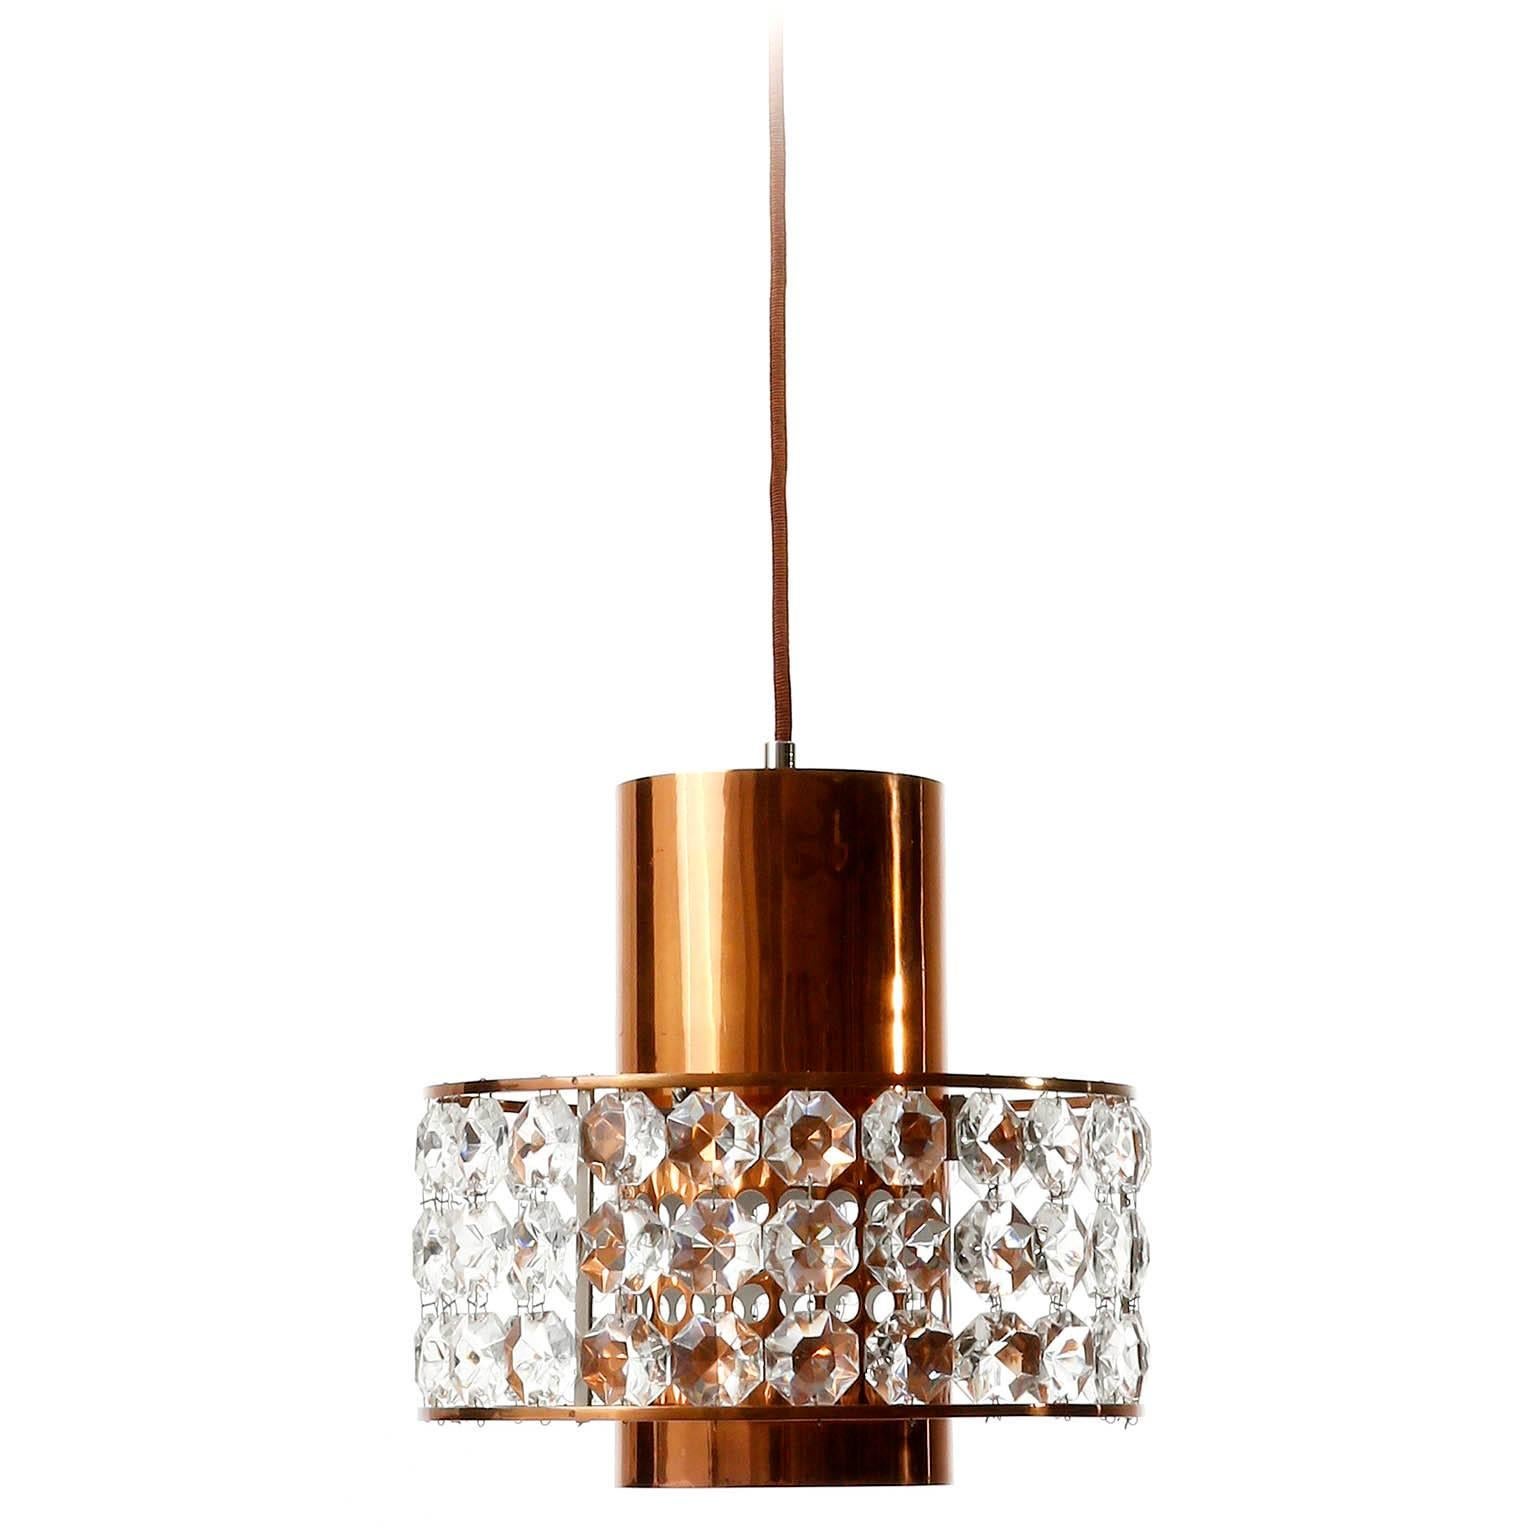 One of three fantastic lanterns or pendant lamps by Bakalowits und Söhne, Austria, Vienna, manufactured in Mid-Century, circa 1960.
They are made of a nickel-plated brass and copper frame which is decorated with diamond cut crystal glass. There is